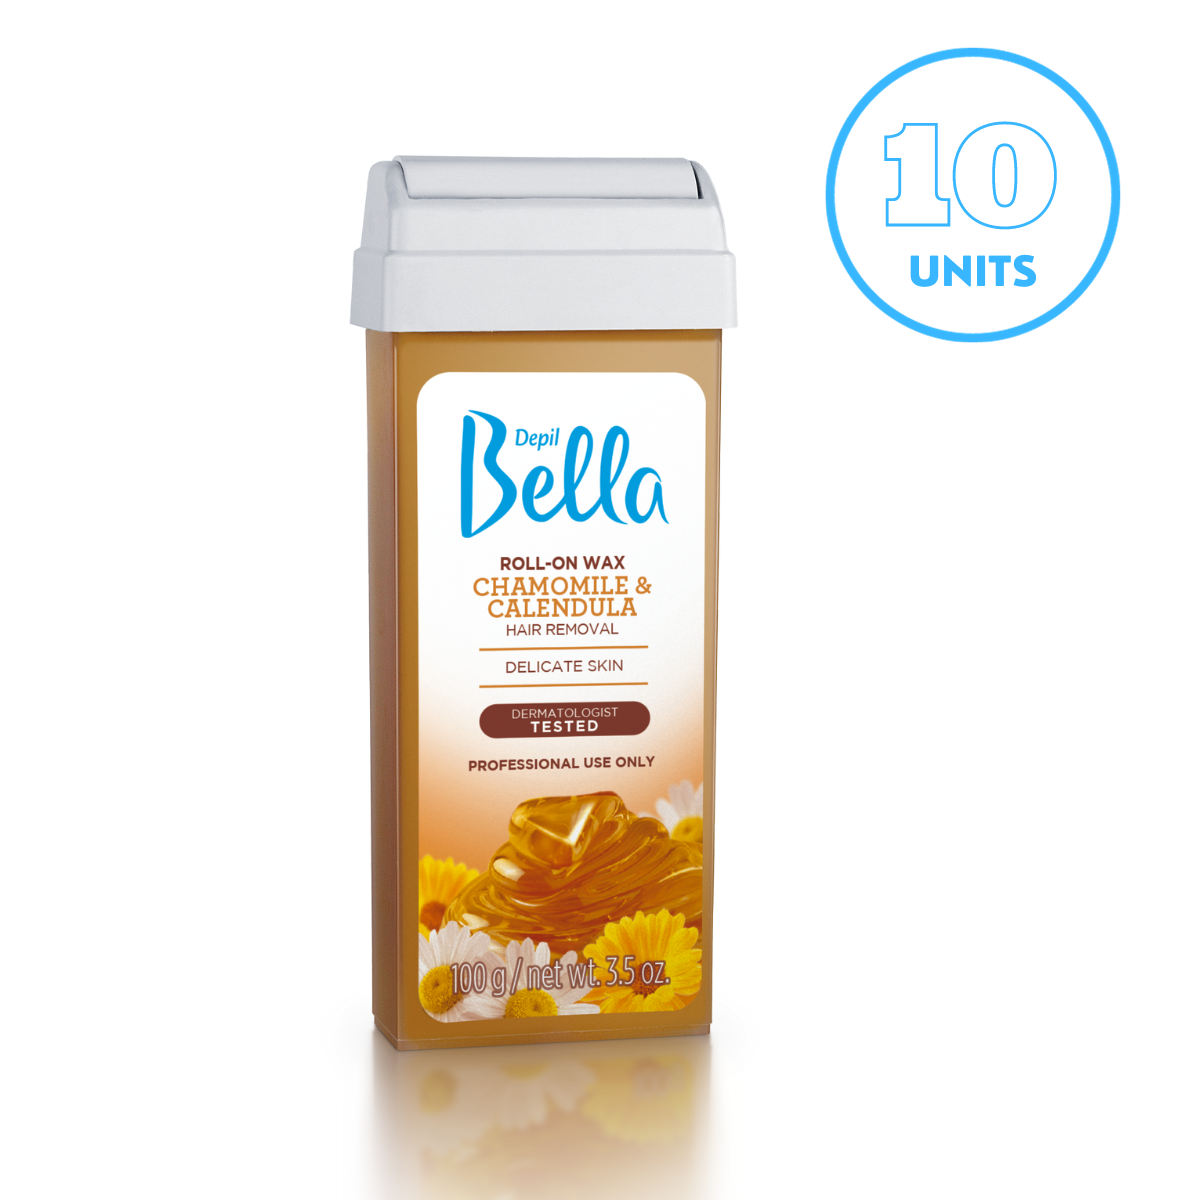 Depil Bella Chamomile and Calendula Roll-On Depilatory Wax, 3.52oz (10 Units Offer) - Buy professional cosmetics dedicated to hair removal